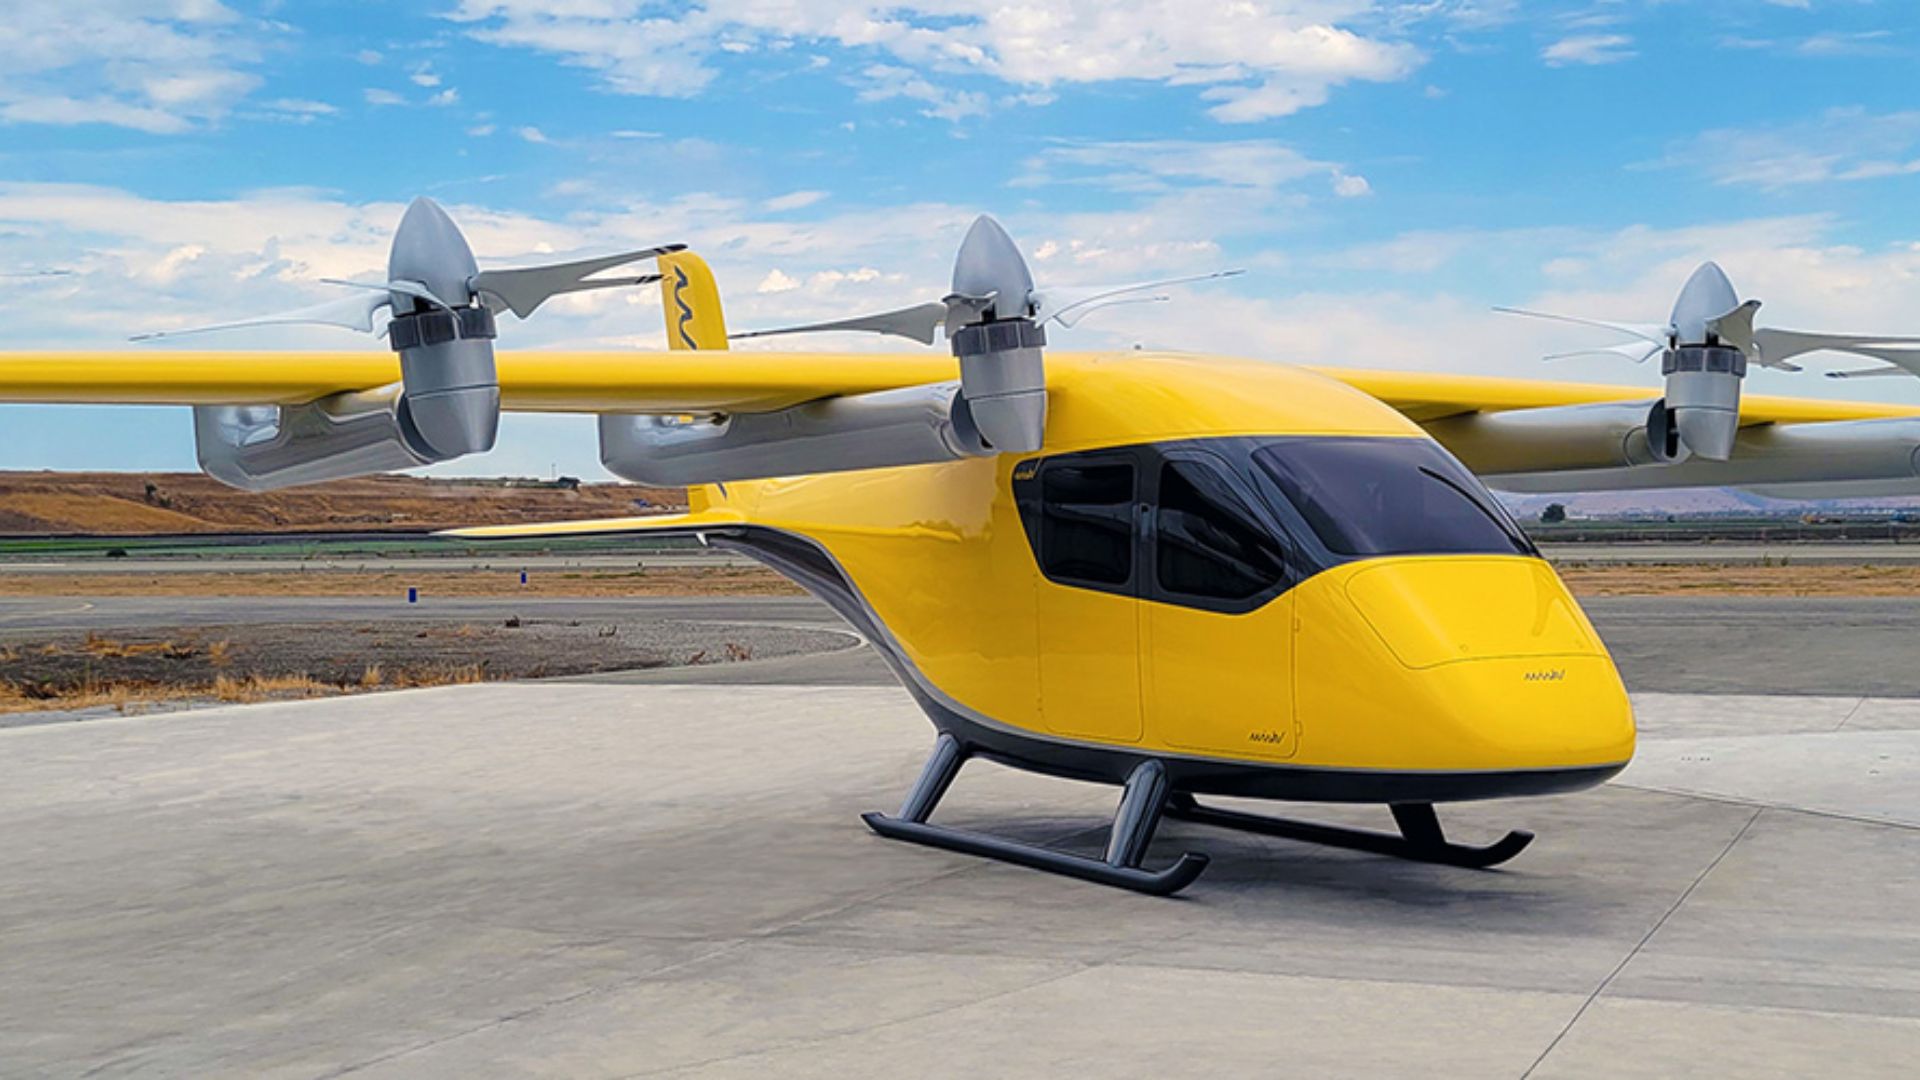 Boeing’s Wisk to introduce flying taxis in Asia by 2030 [Video]